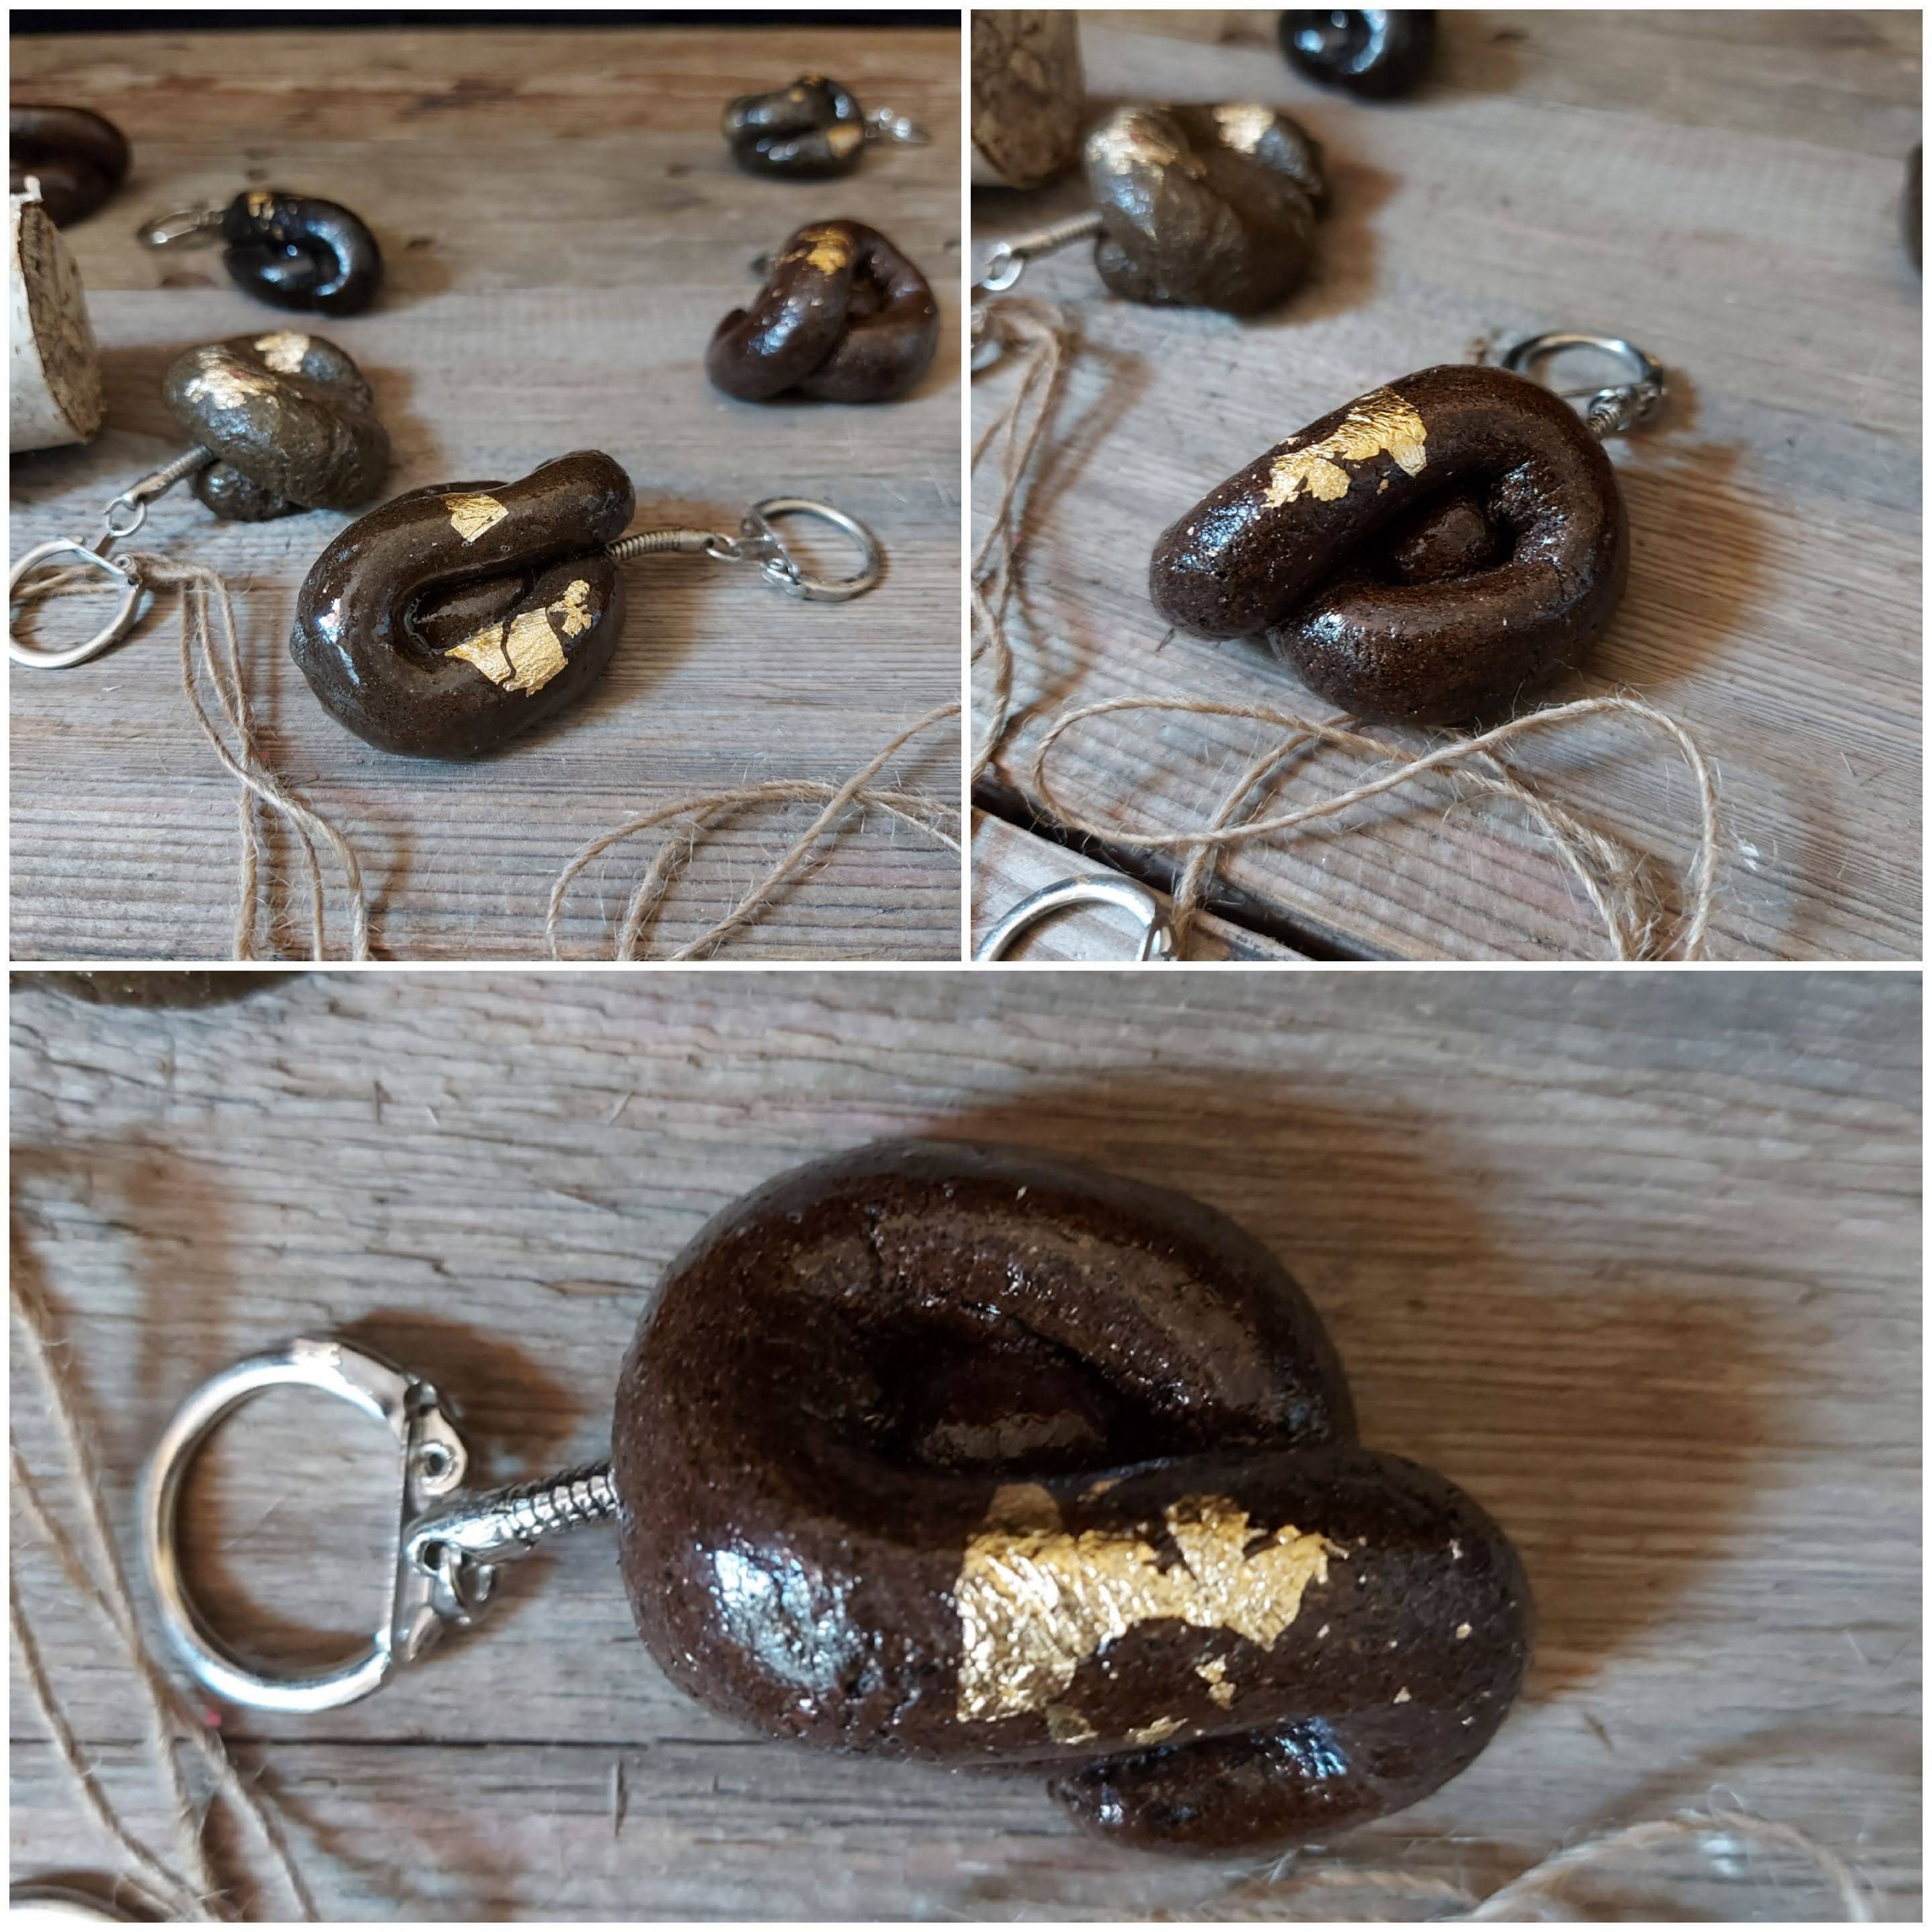 Keychain-made of Poop for Good Luck Lucky Happy Poop Key Ring Unique  Unusual Eccentric Good Energy Funny Fun Gift for Happiness Shit Happens 